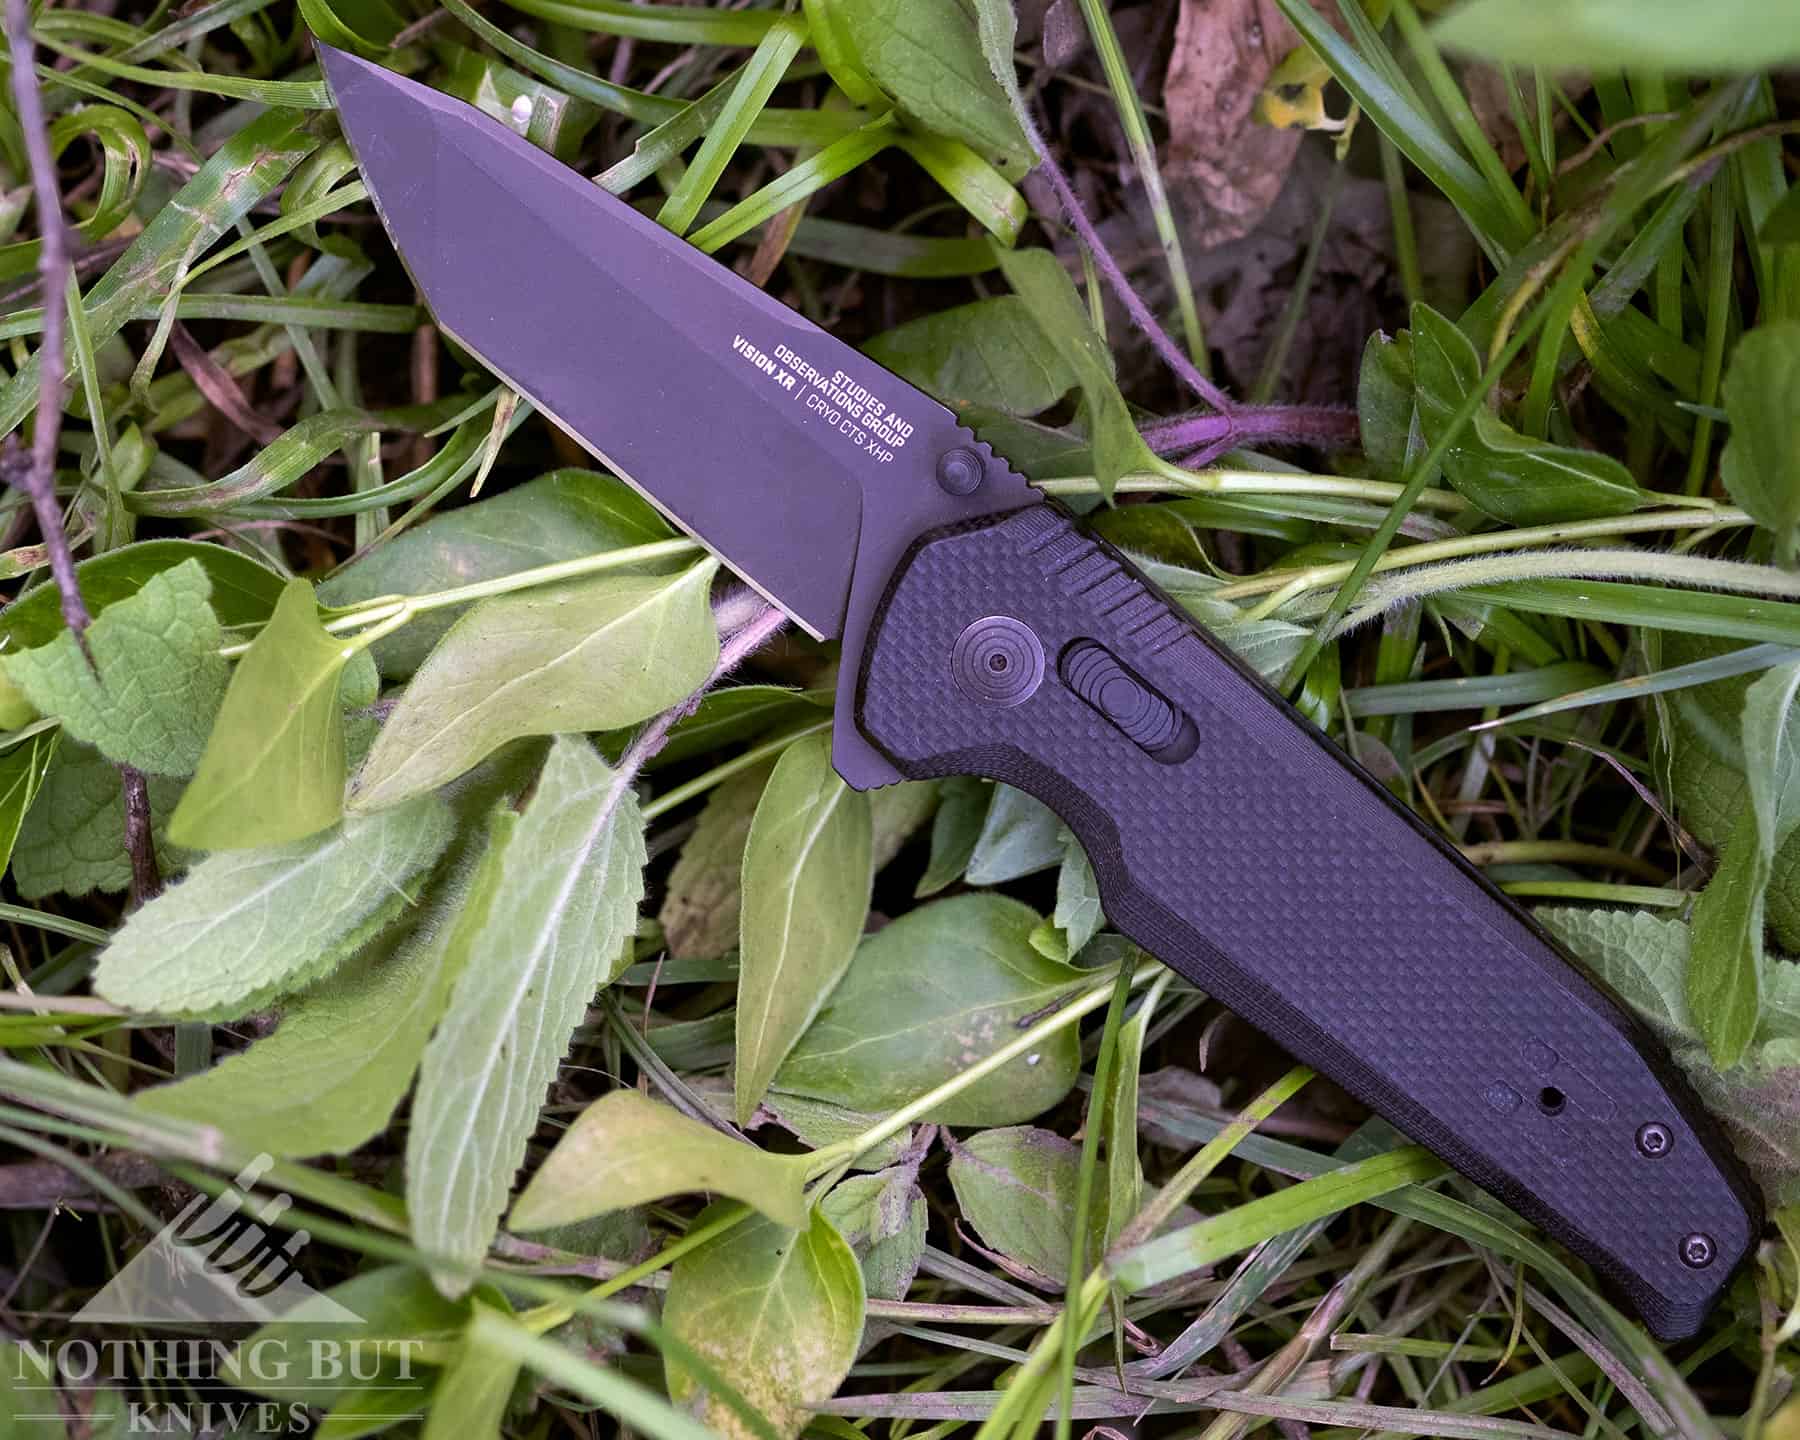 In-spite of a few drawbacks the SOG Vision XR is a good knife with tough steel and a comfortable handle.